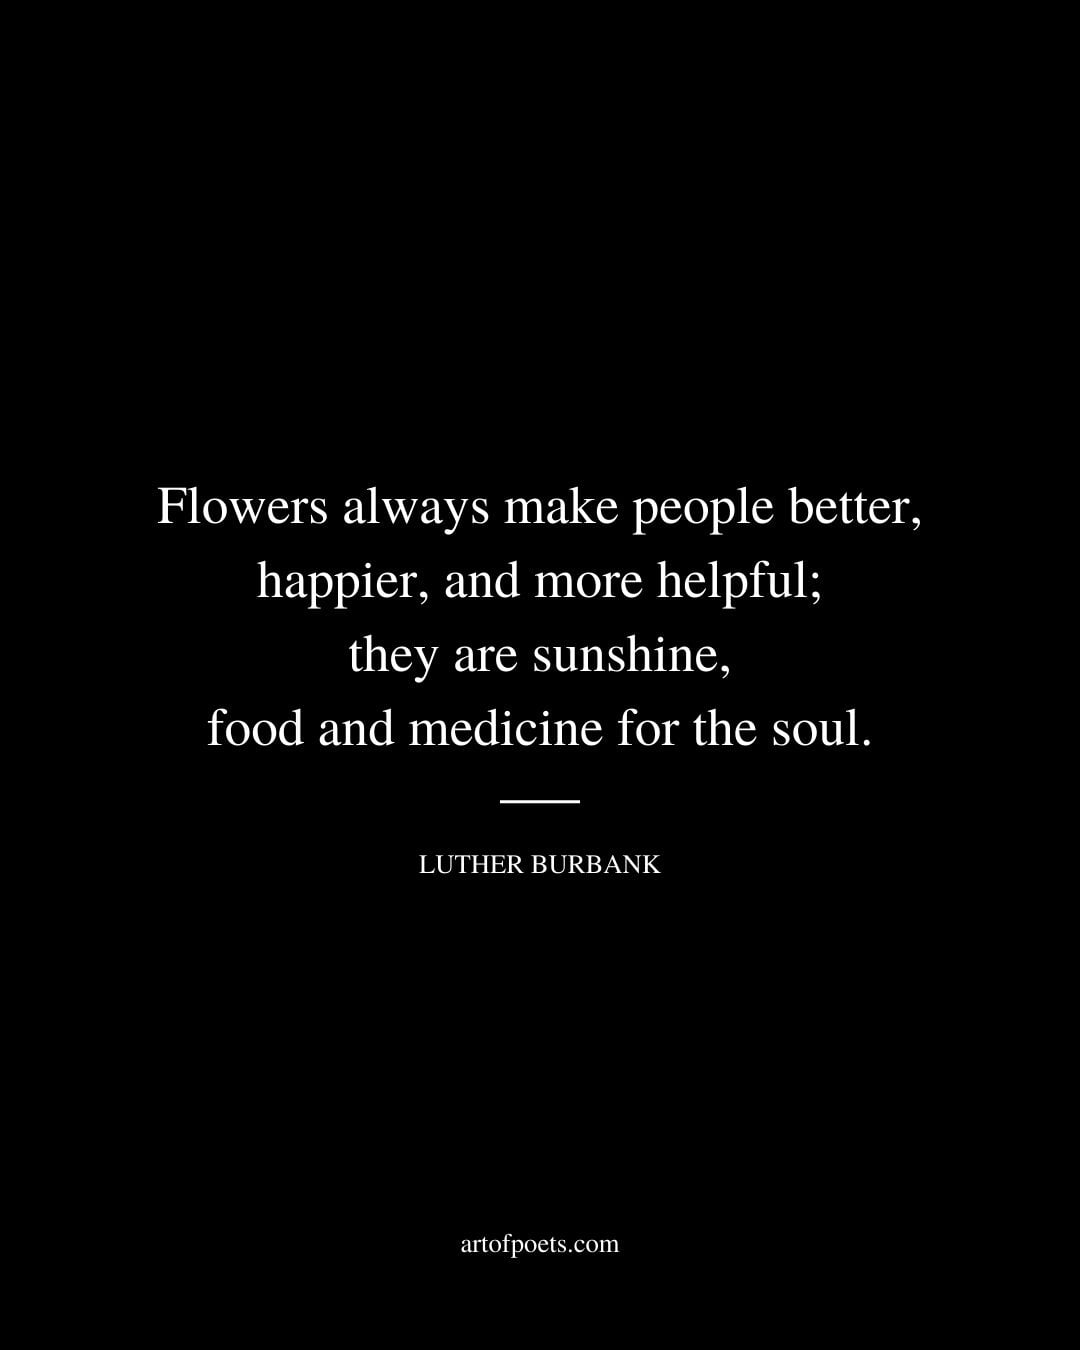 Flowers always make people better happier and more helpful they are sunshine food and medicine for the soul. Luther Burbank